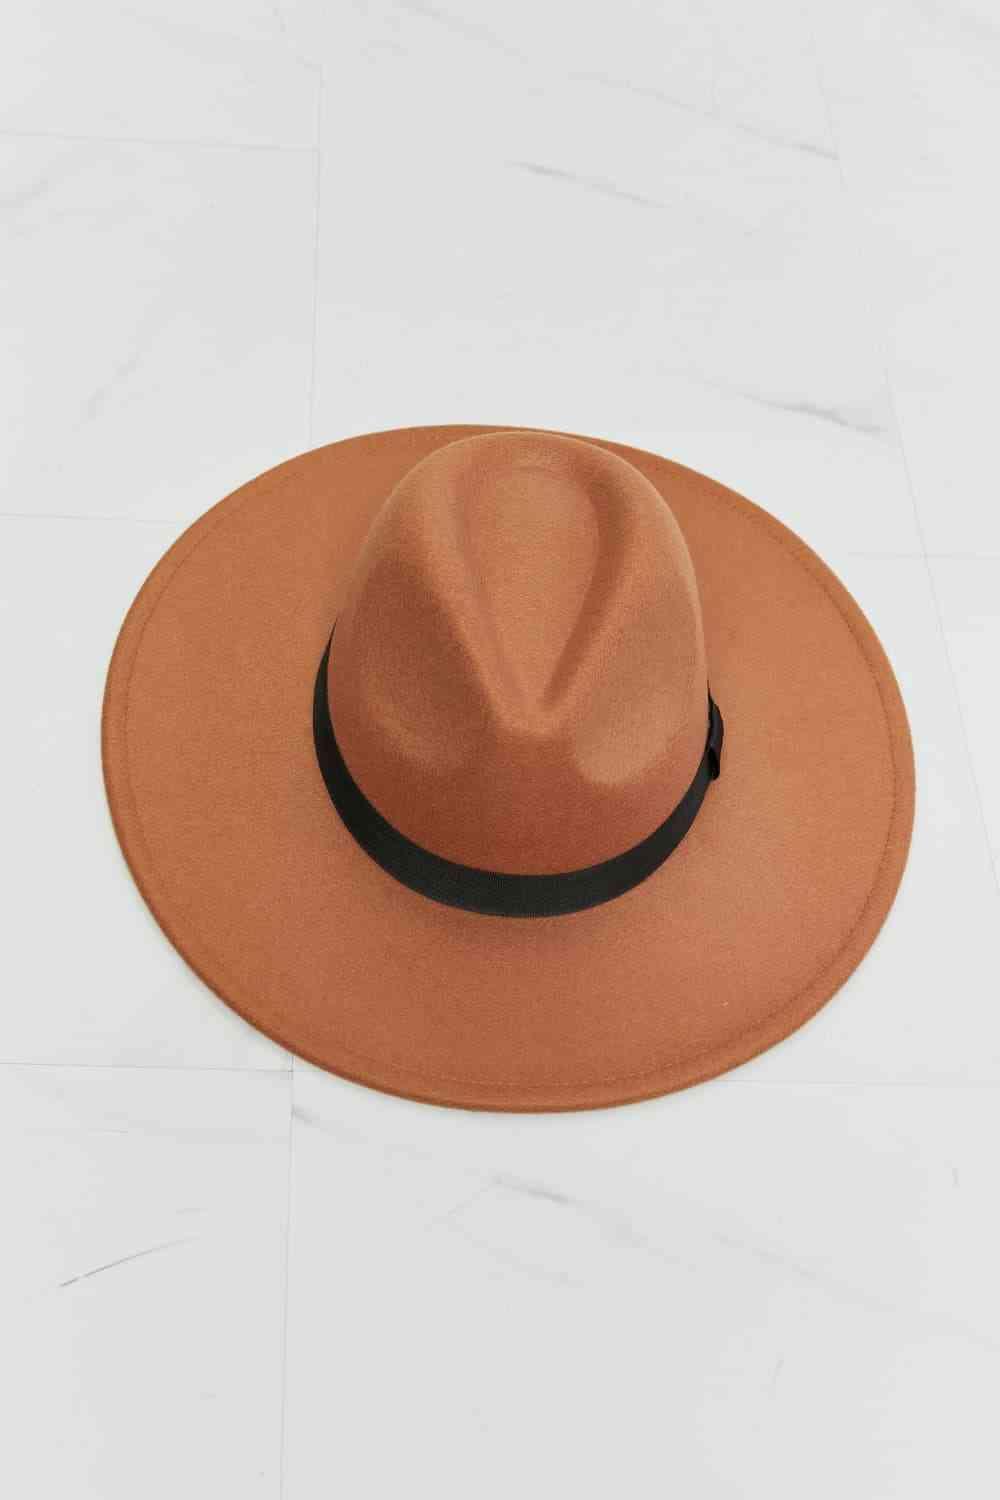 Fame Enjoy The Simple Things Fedora Hat - Happily Ever Atchison Shop Co.